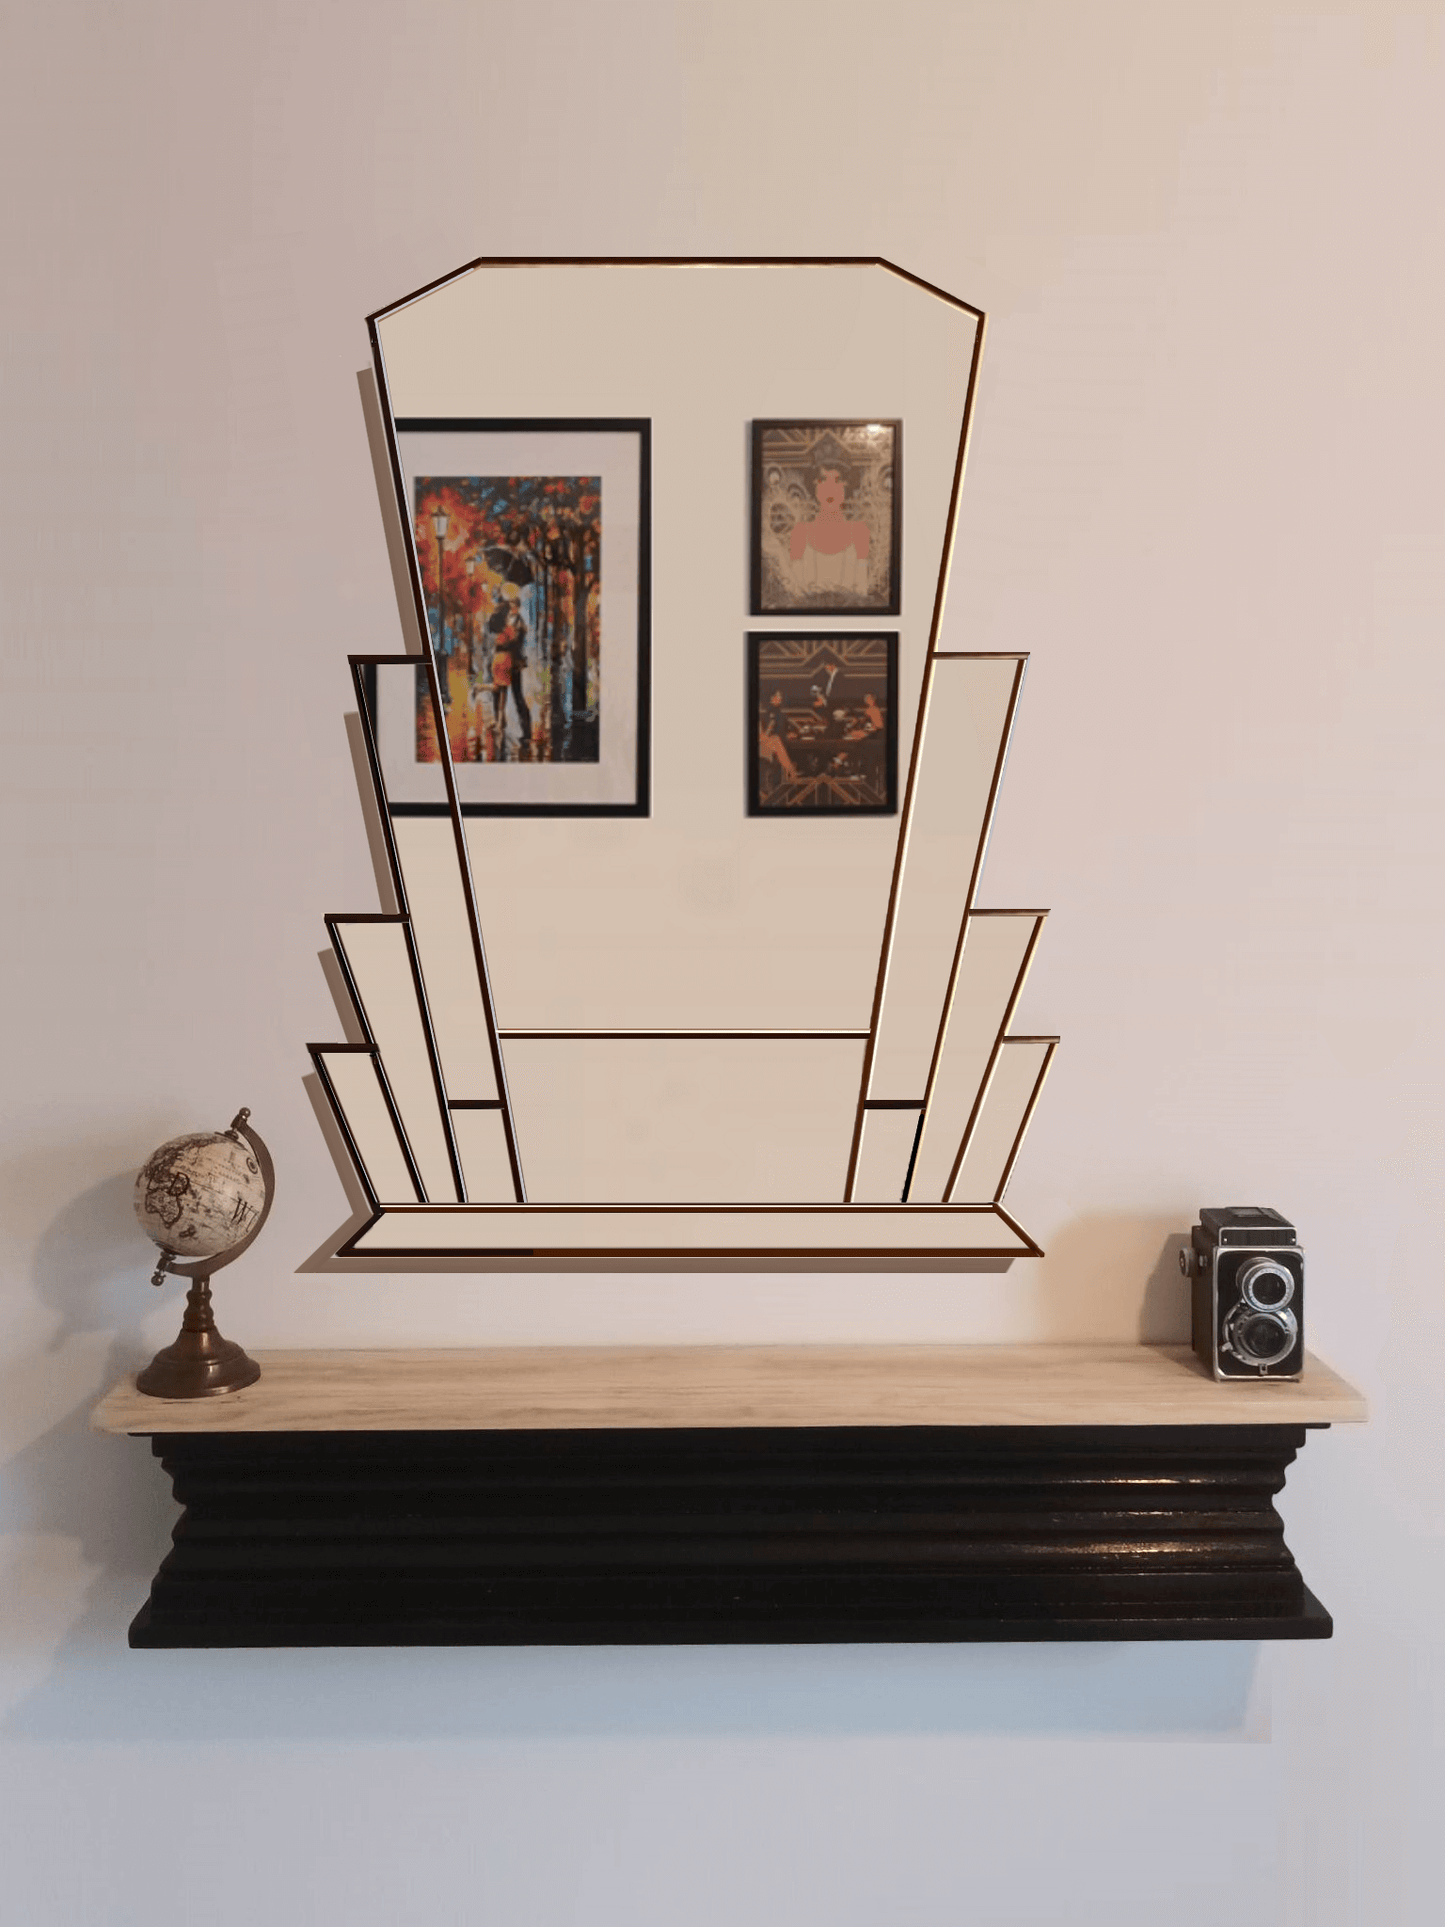 Large handcrafted art deco wall mirror exclusive mirror at JPC Mirrors made in the uk finished in black 